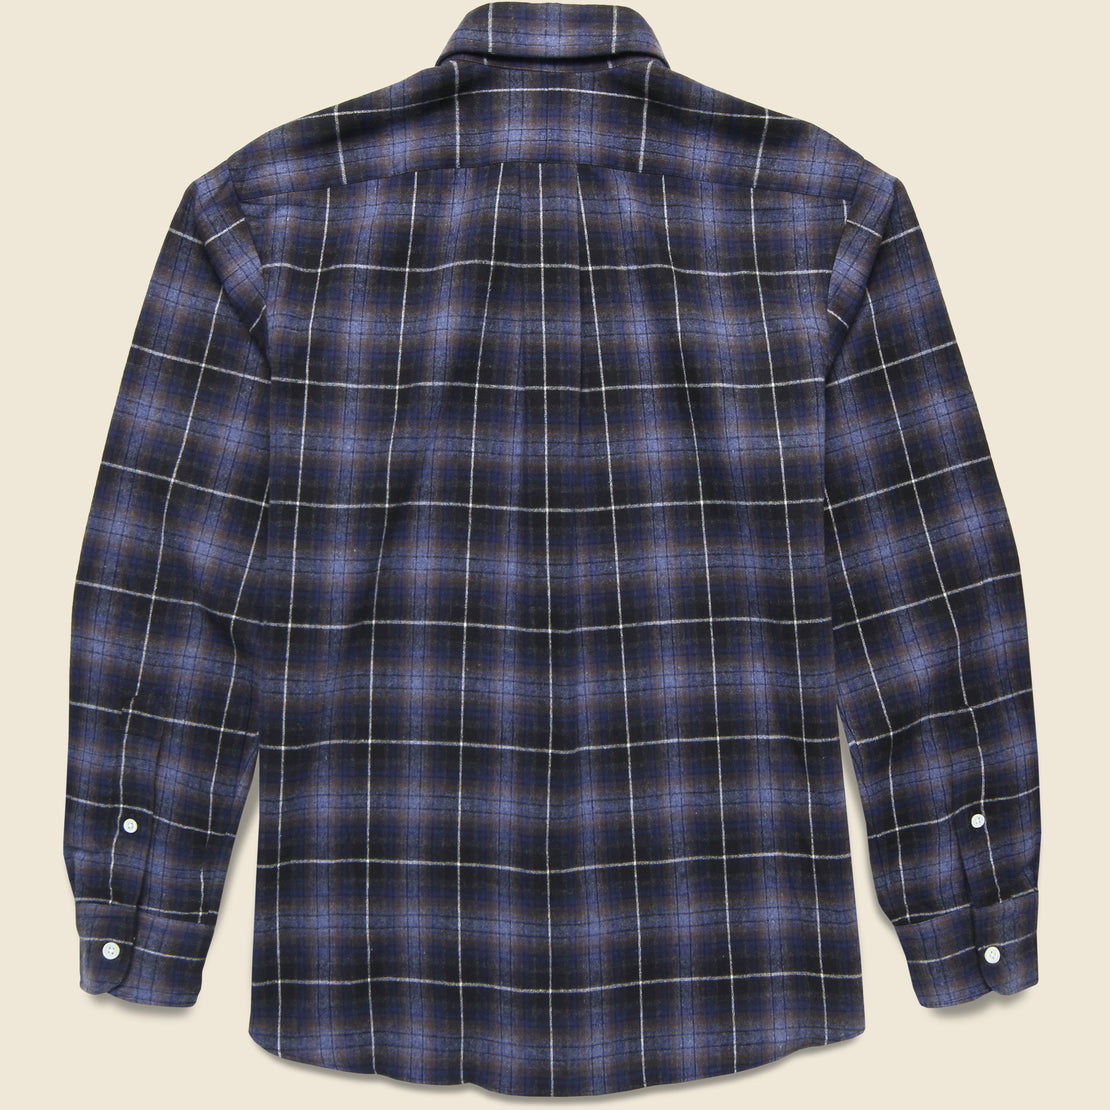 Check Twill Flannel Shirt -  Navy/Brown/White - Hamilton Shirt Co. - STAG Provisions - Tops - L/S Woven - Plaid